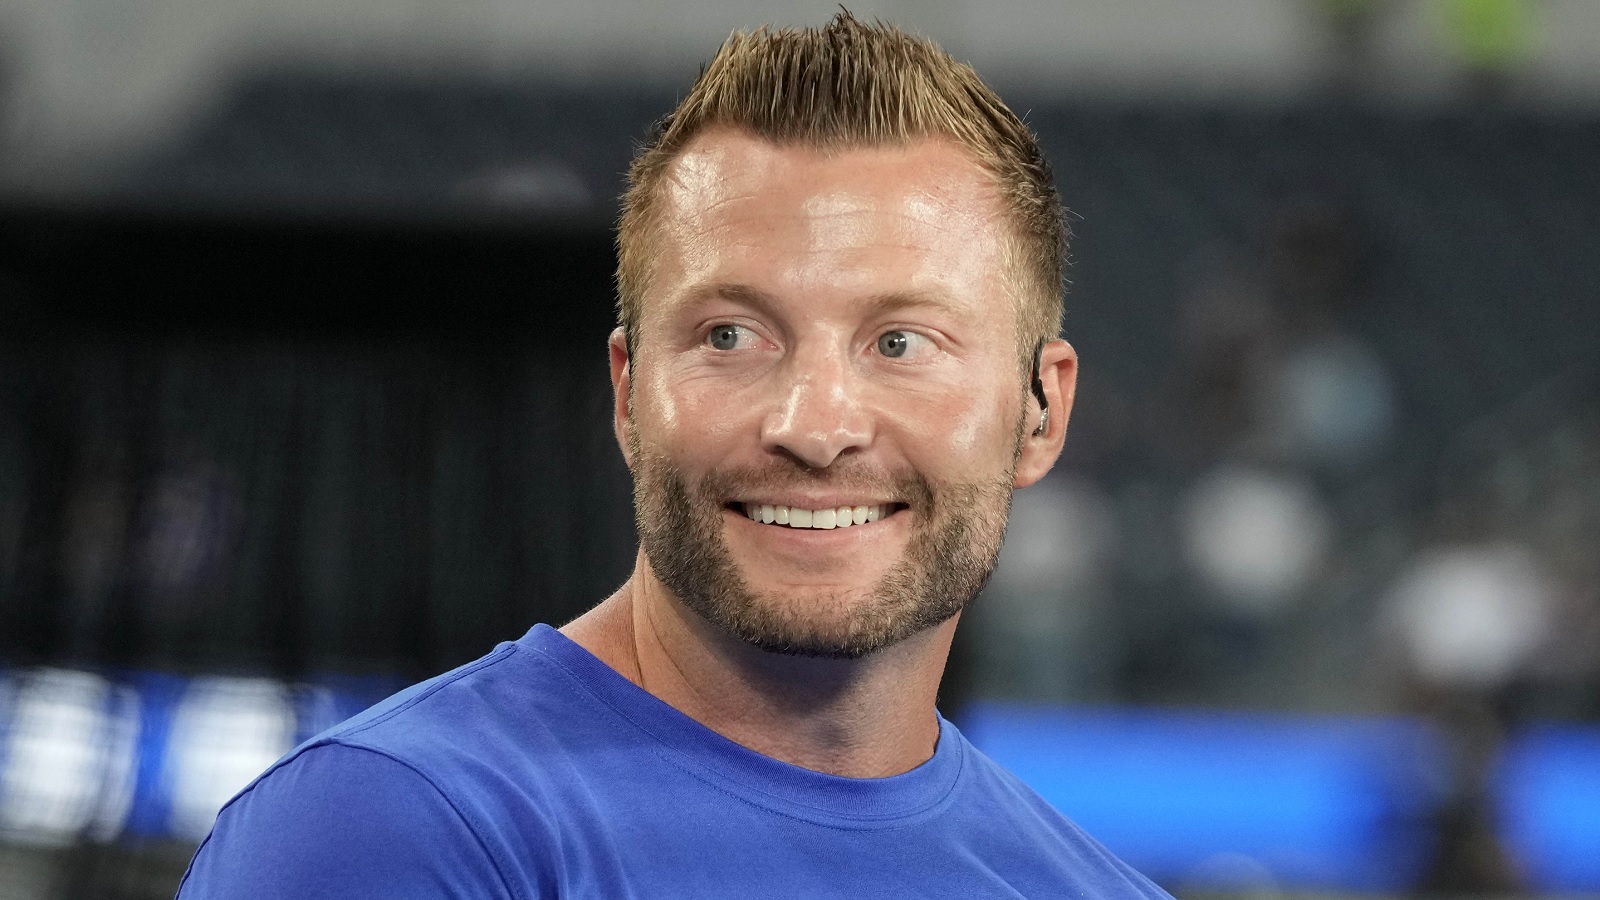 Sean McVay clears up 1 big question about his future